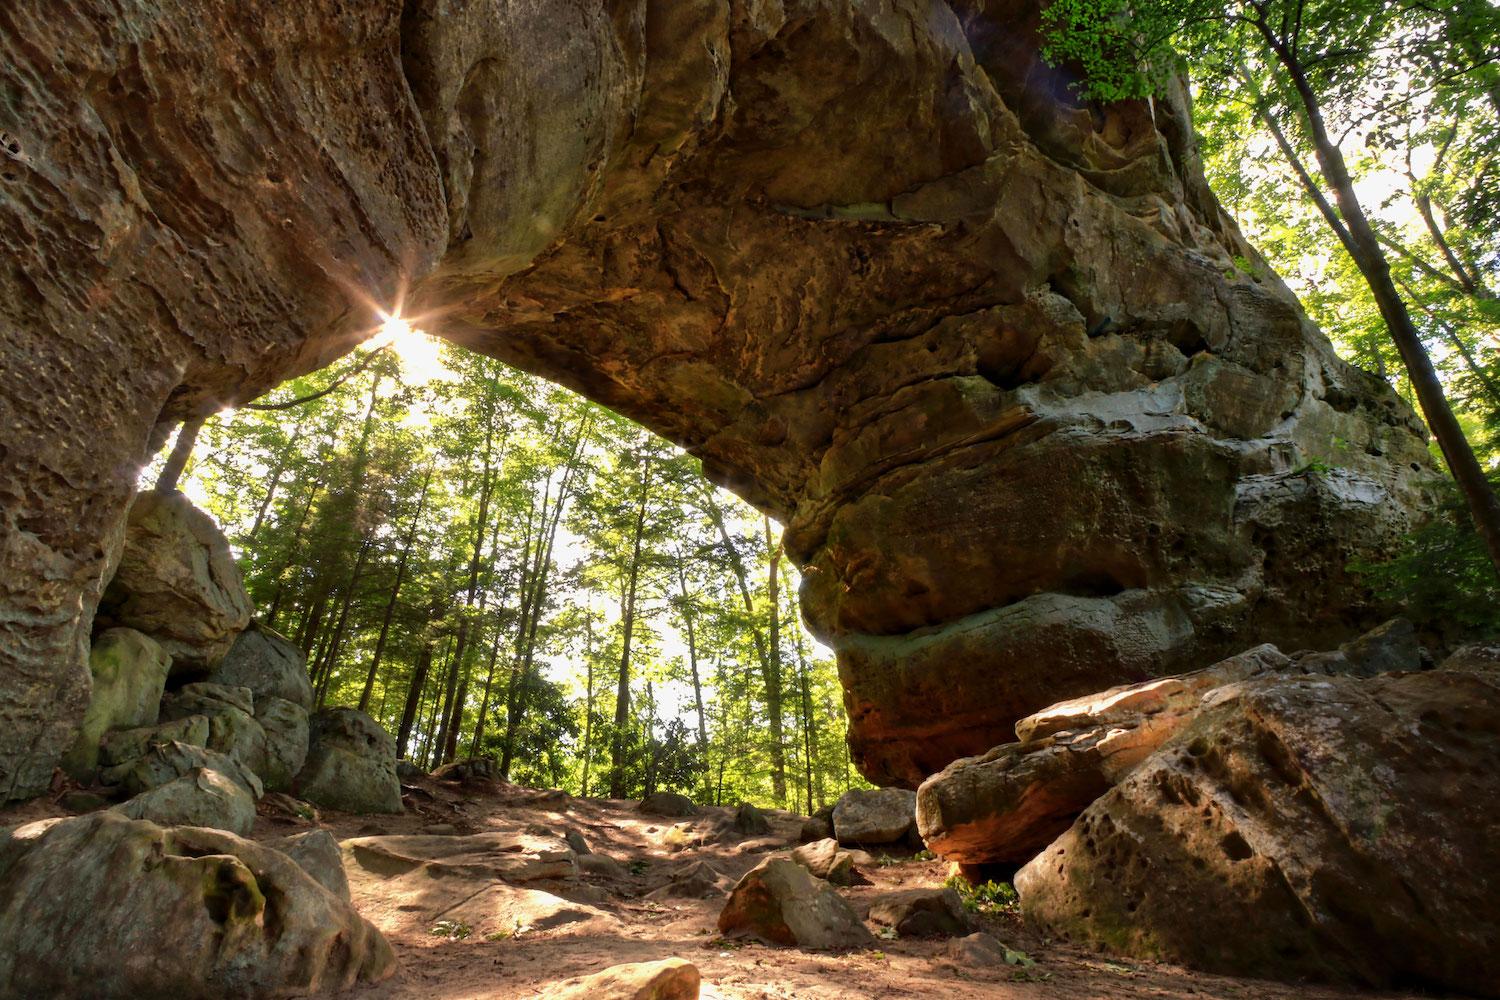 Split Bow Arch is one of the stone wonders at Big South Fork National River and Recreation Area/NPS file